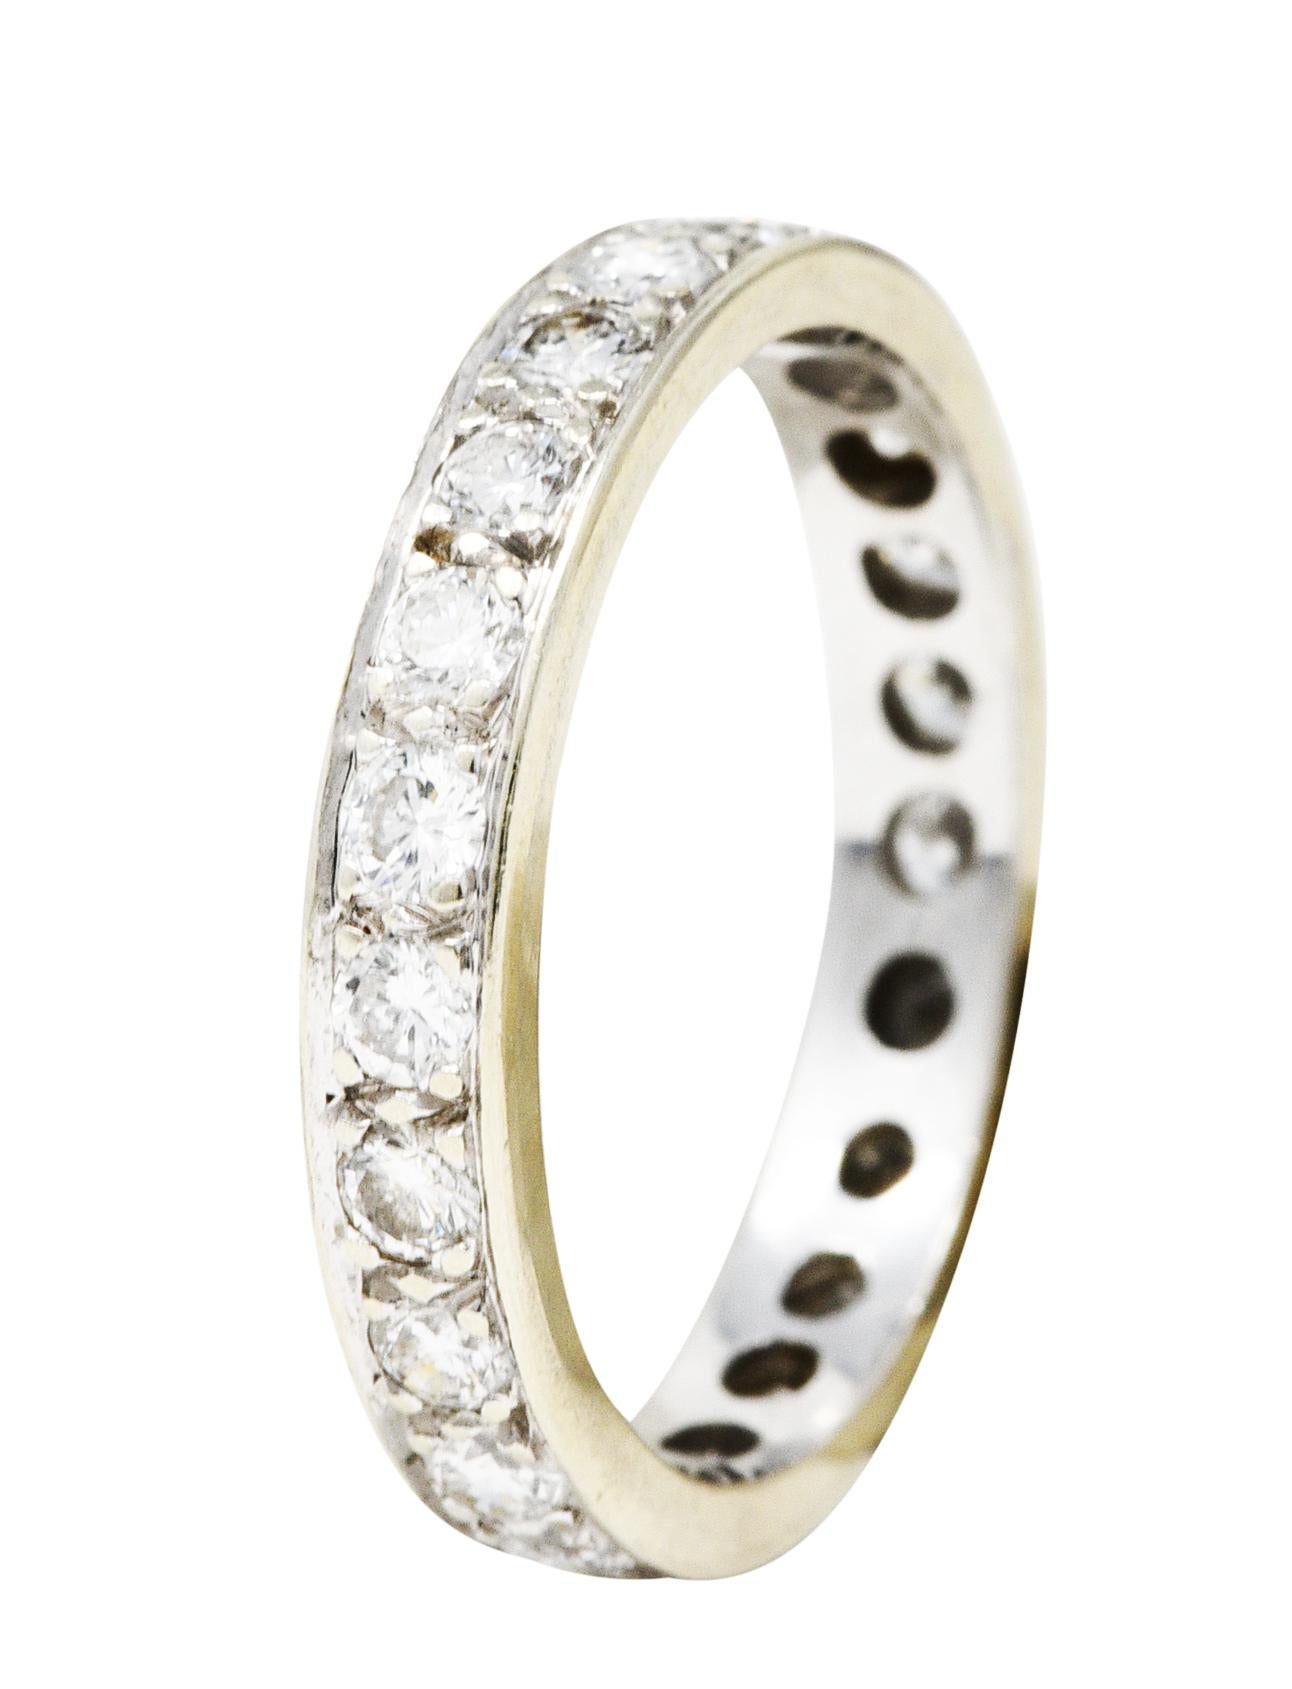 Band ring features round brilliant cut diamonds bead set fully around. Weighing approximately 0.92 carat total - G/H color with VS1 clarity. Tested as 14 karat white gold. Circa: 20th century. Ring size: 5 1/4 and not sizable. Measures: North to